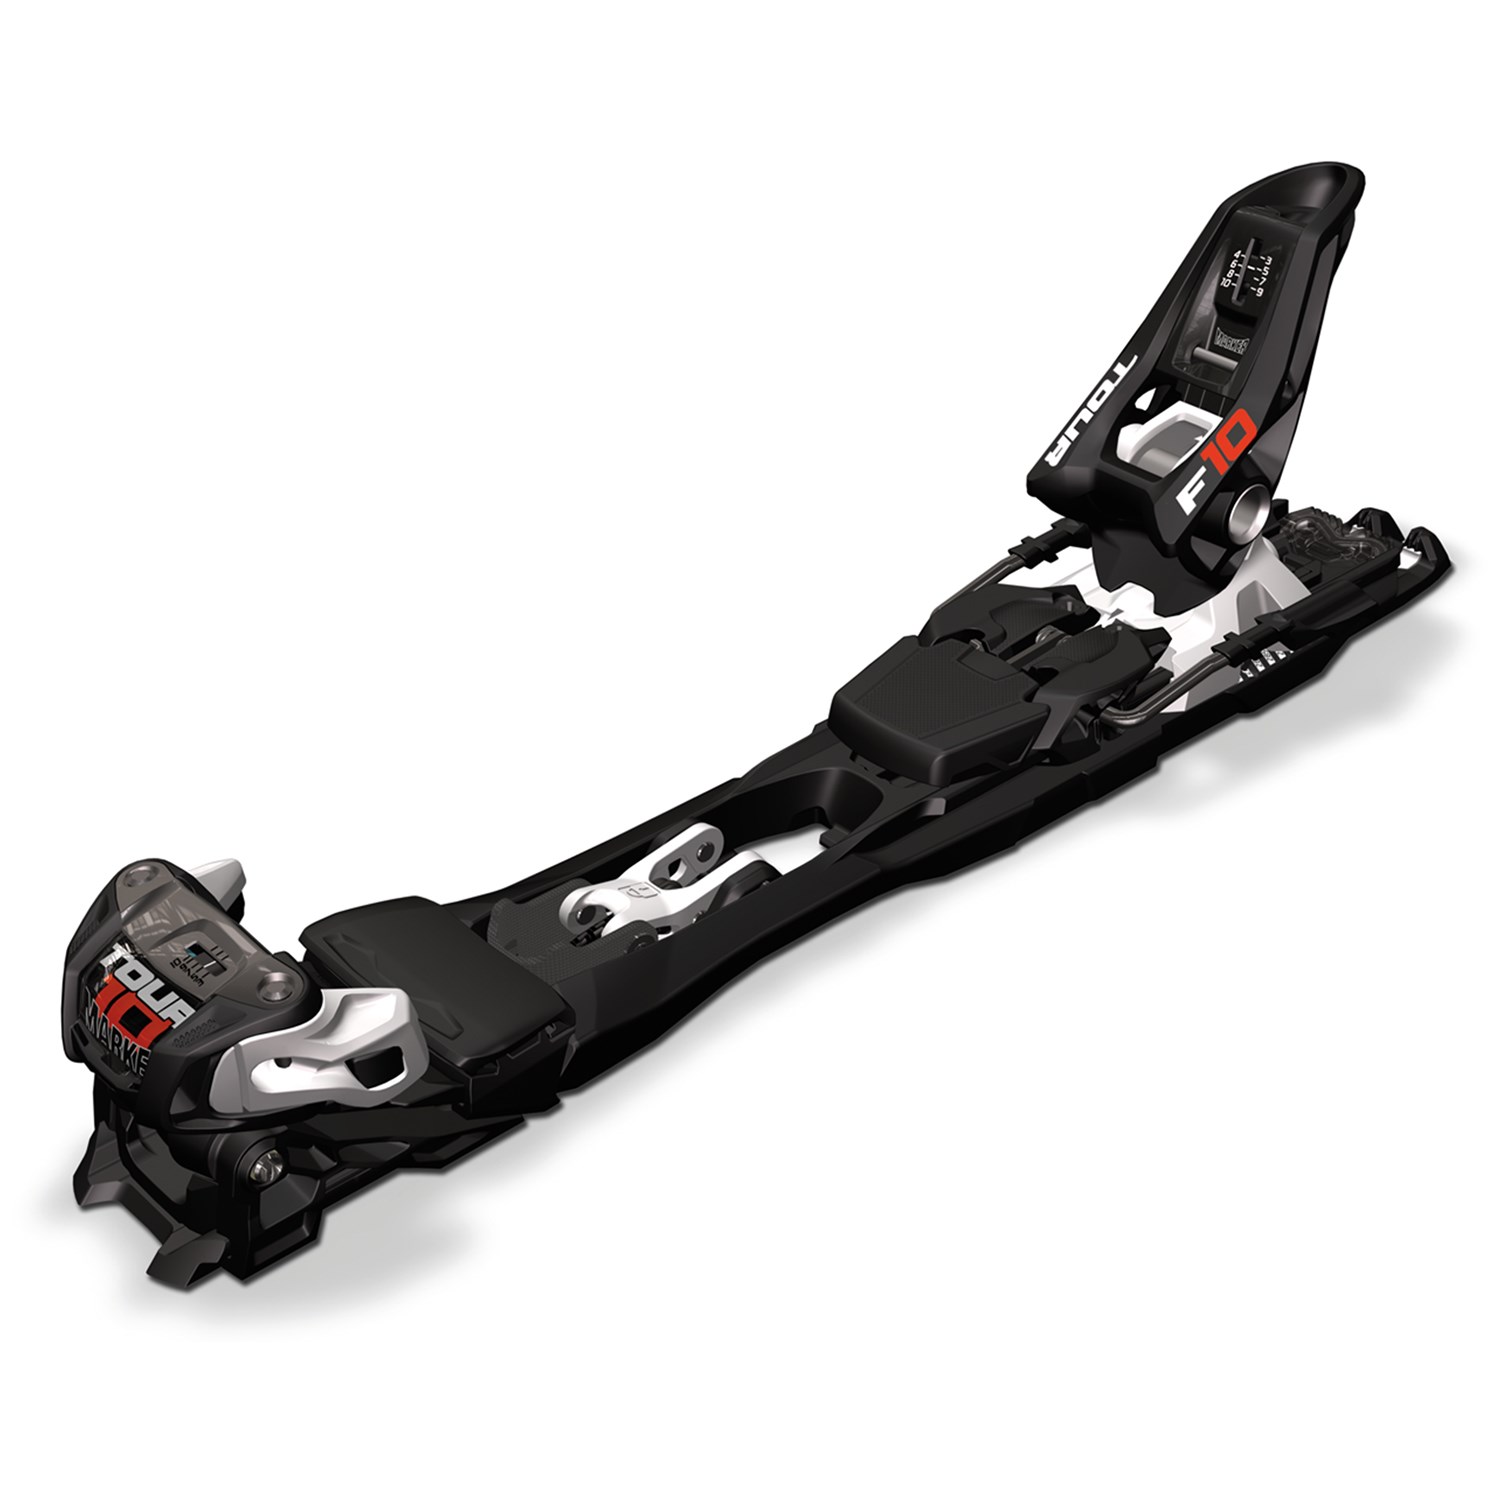 Which Ski Touring Binding is right for 